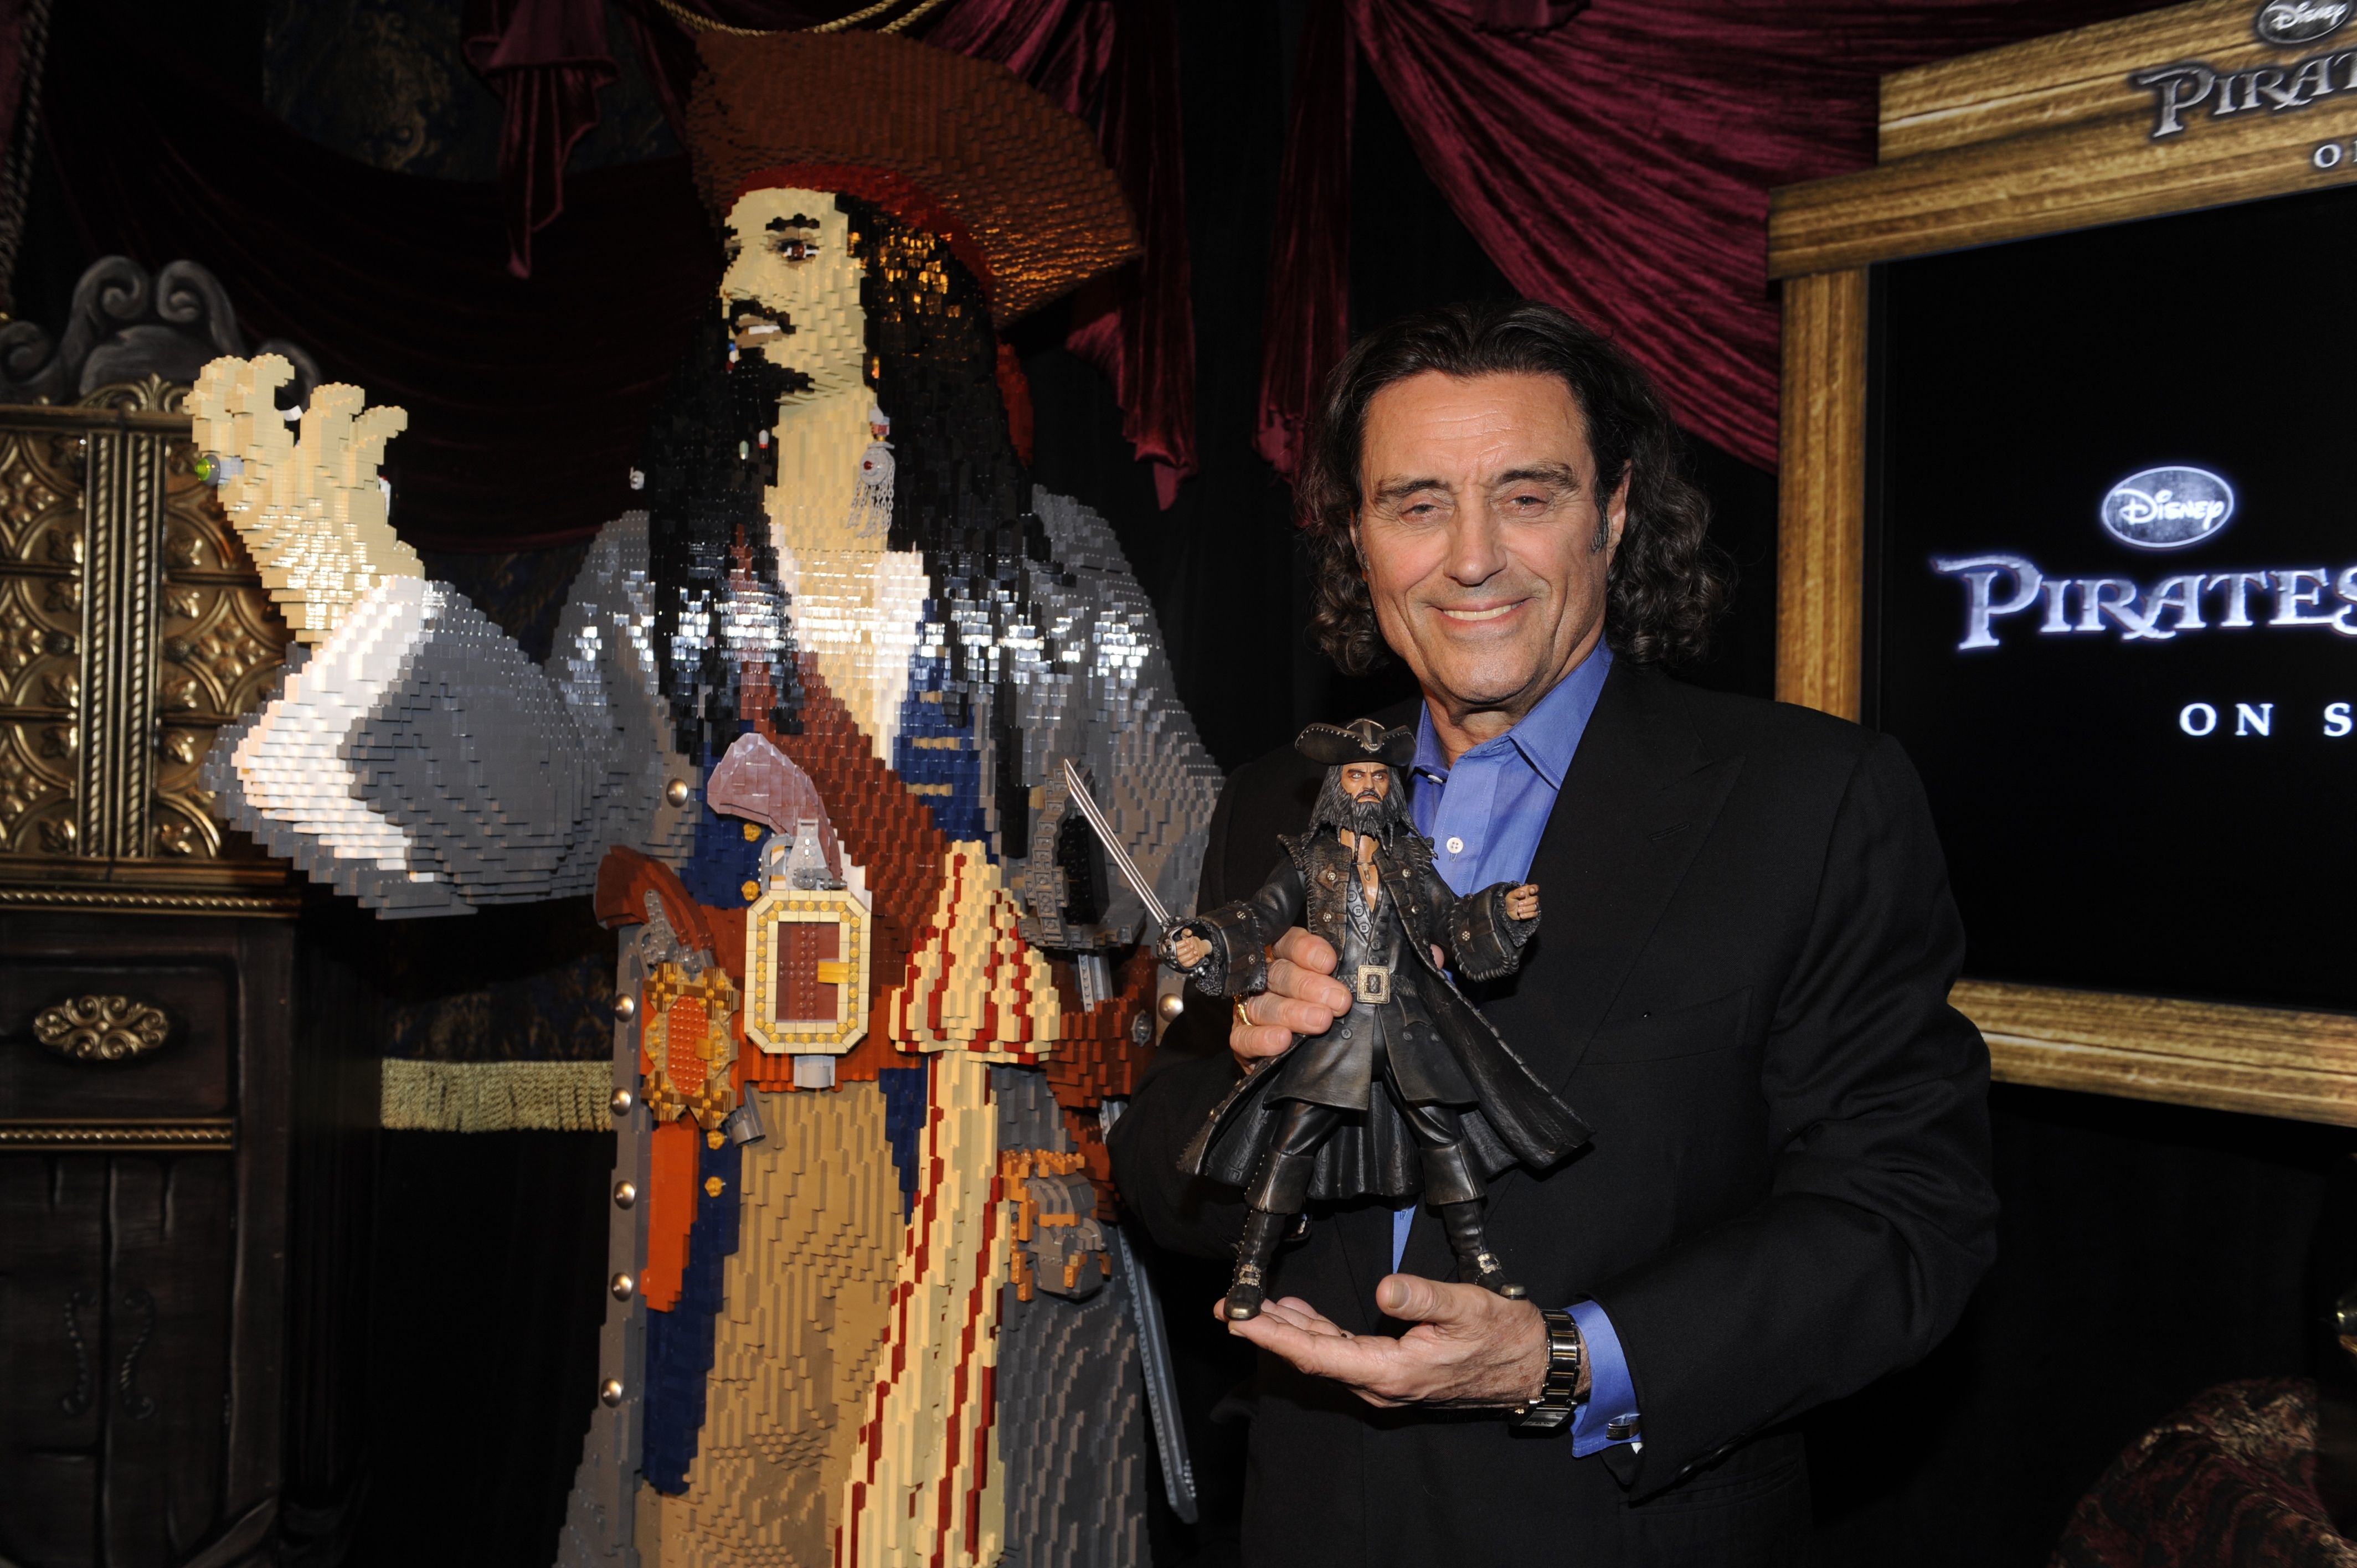 Ian McShane helps debut the Pirates of the Caribbean: On Stranger Tides toy line in New YorkDisney Consumer Products charted a course for adventure as it unveiled a new toy line that captures the fantasy, action and adventure of {5}, the fourth installment of the film series set for release in Disney Digital 3D on May 20, 2011. At a pirate-themed preview event last night in New York City, the {6} toy assortment from JAKKS Pacific, Inc. and new LEGO {7}: The Video Game and construction toys were 